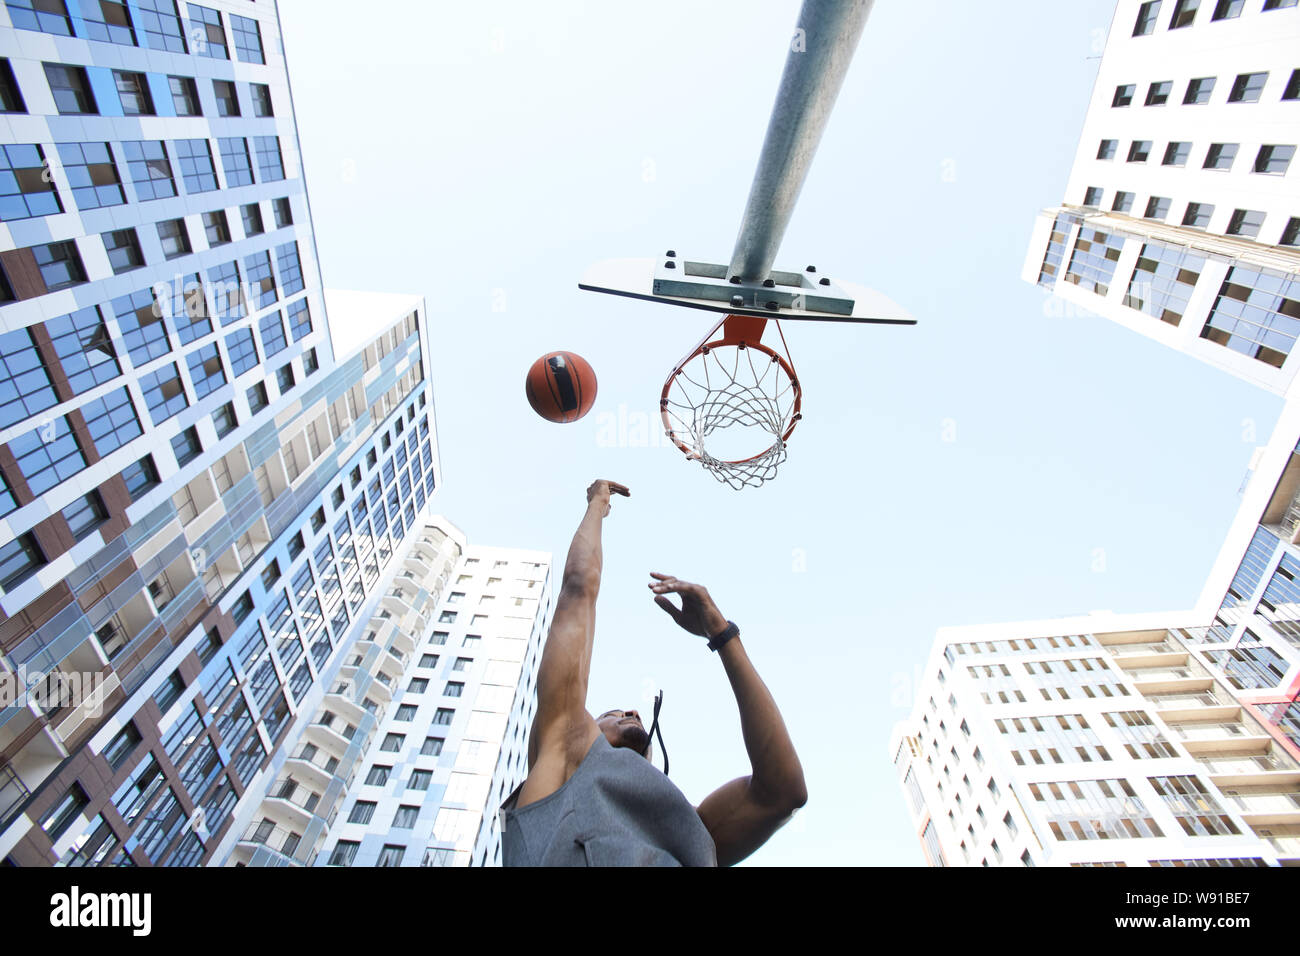 Low angle view at African basketball player shooting slam dunk against sky in urban background, copy space Stock Photo